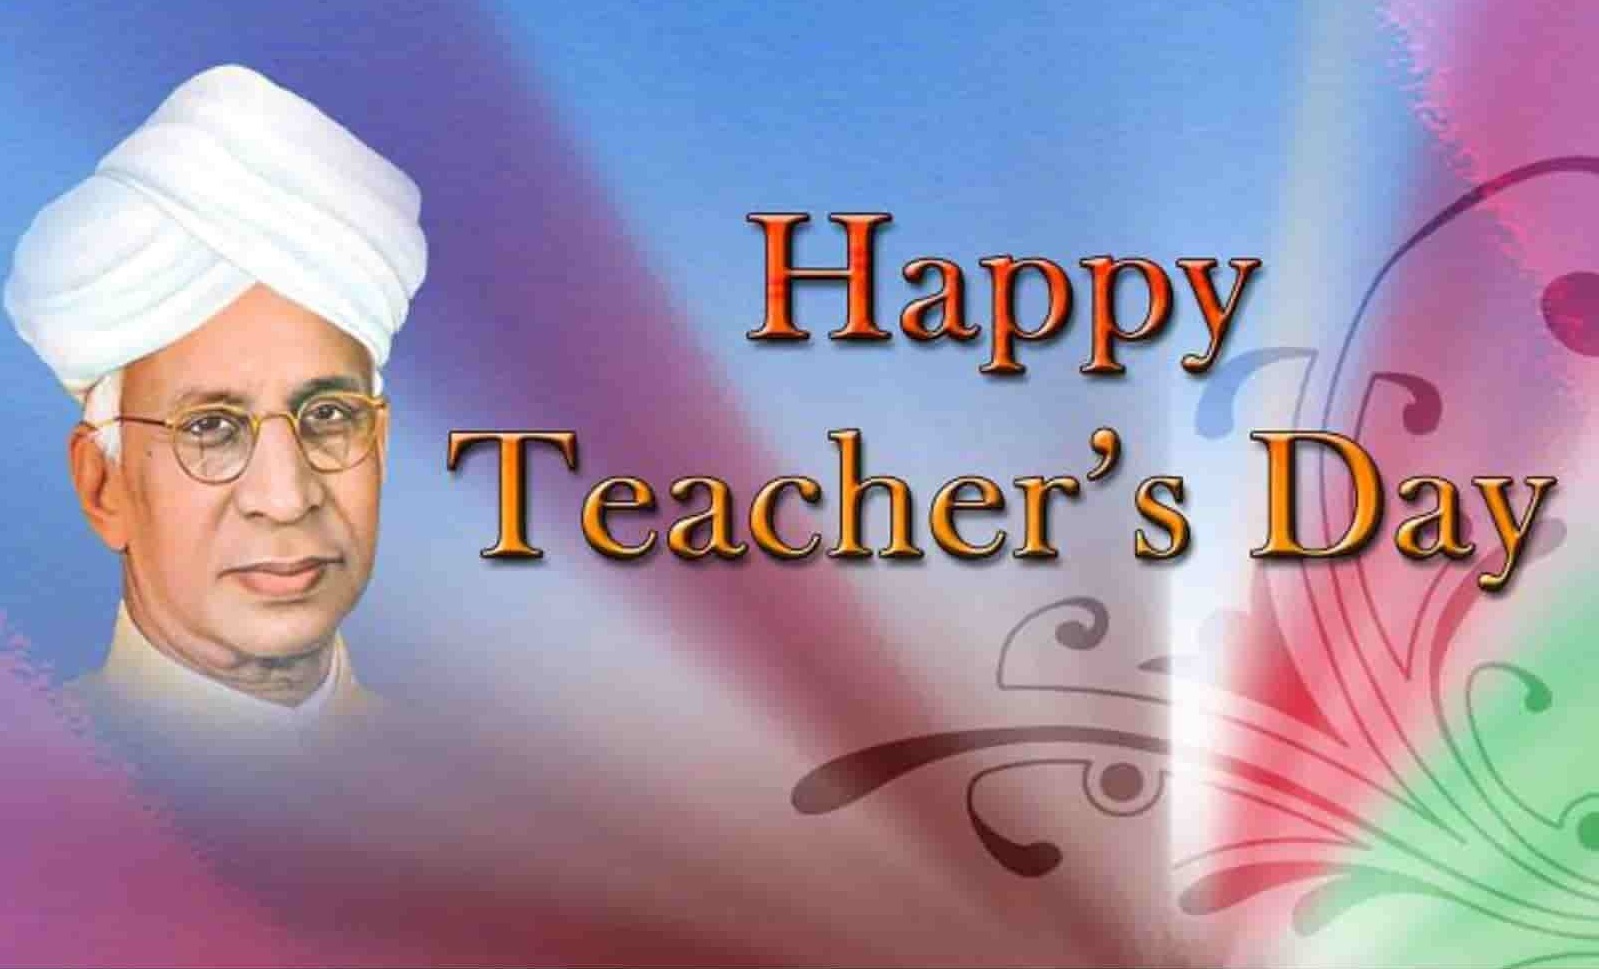 Happy Teachers Day Hd Wallpapers - 5th September Teachers Day - HD Wallpaper 